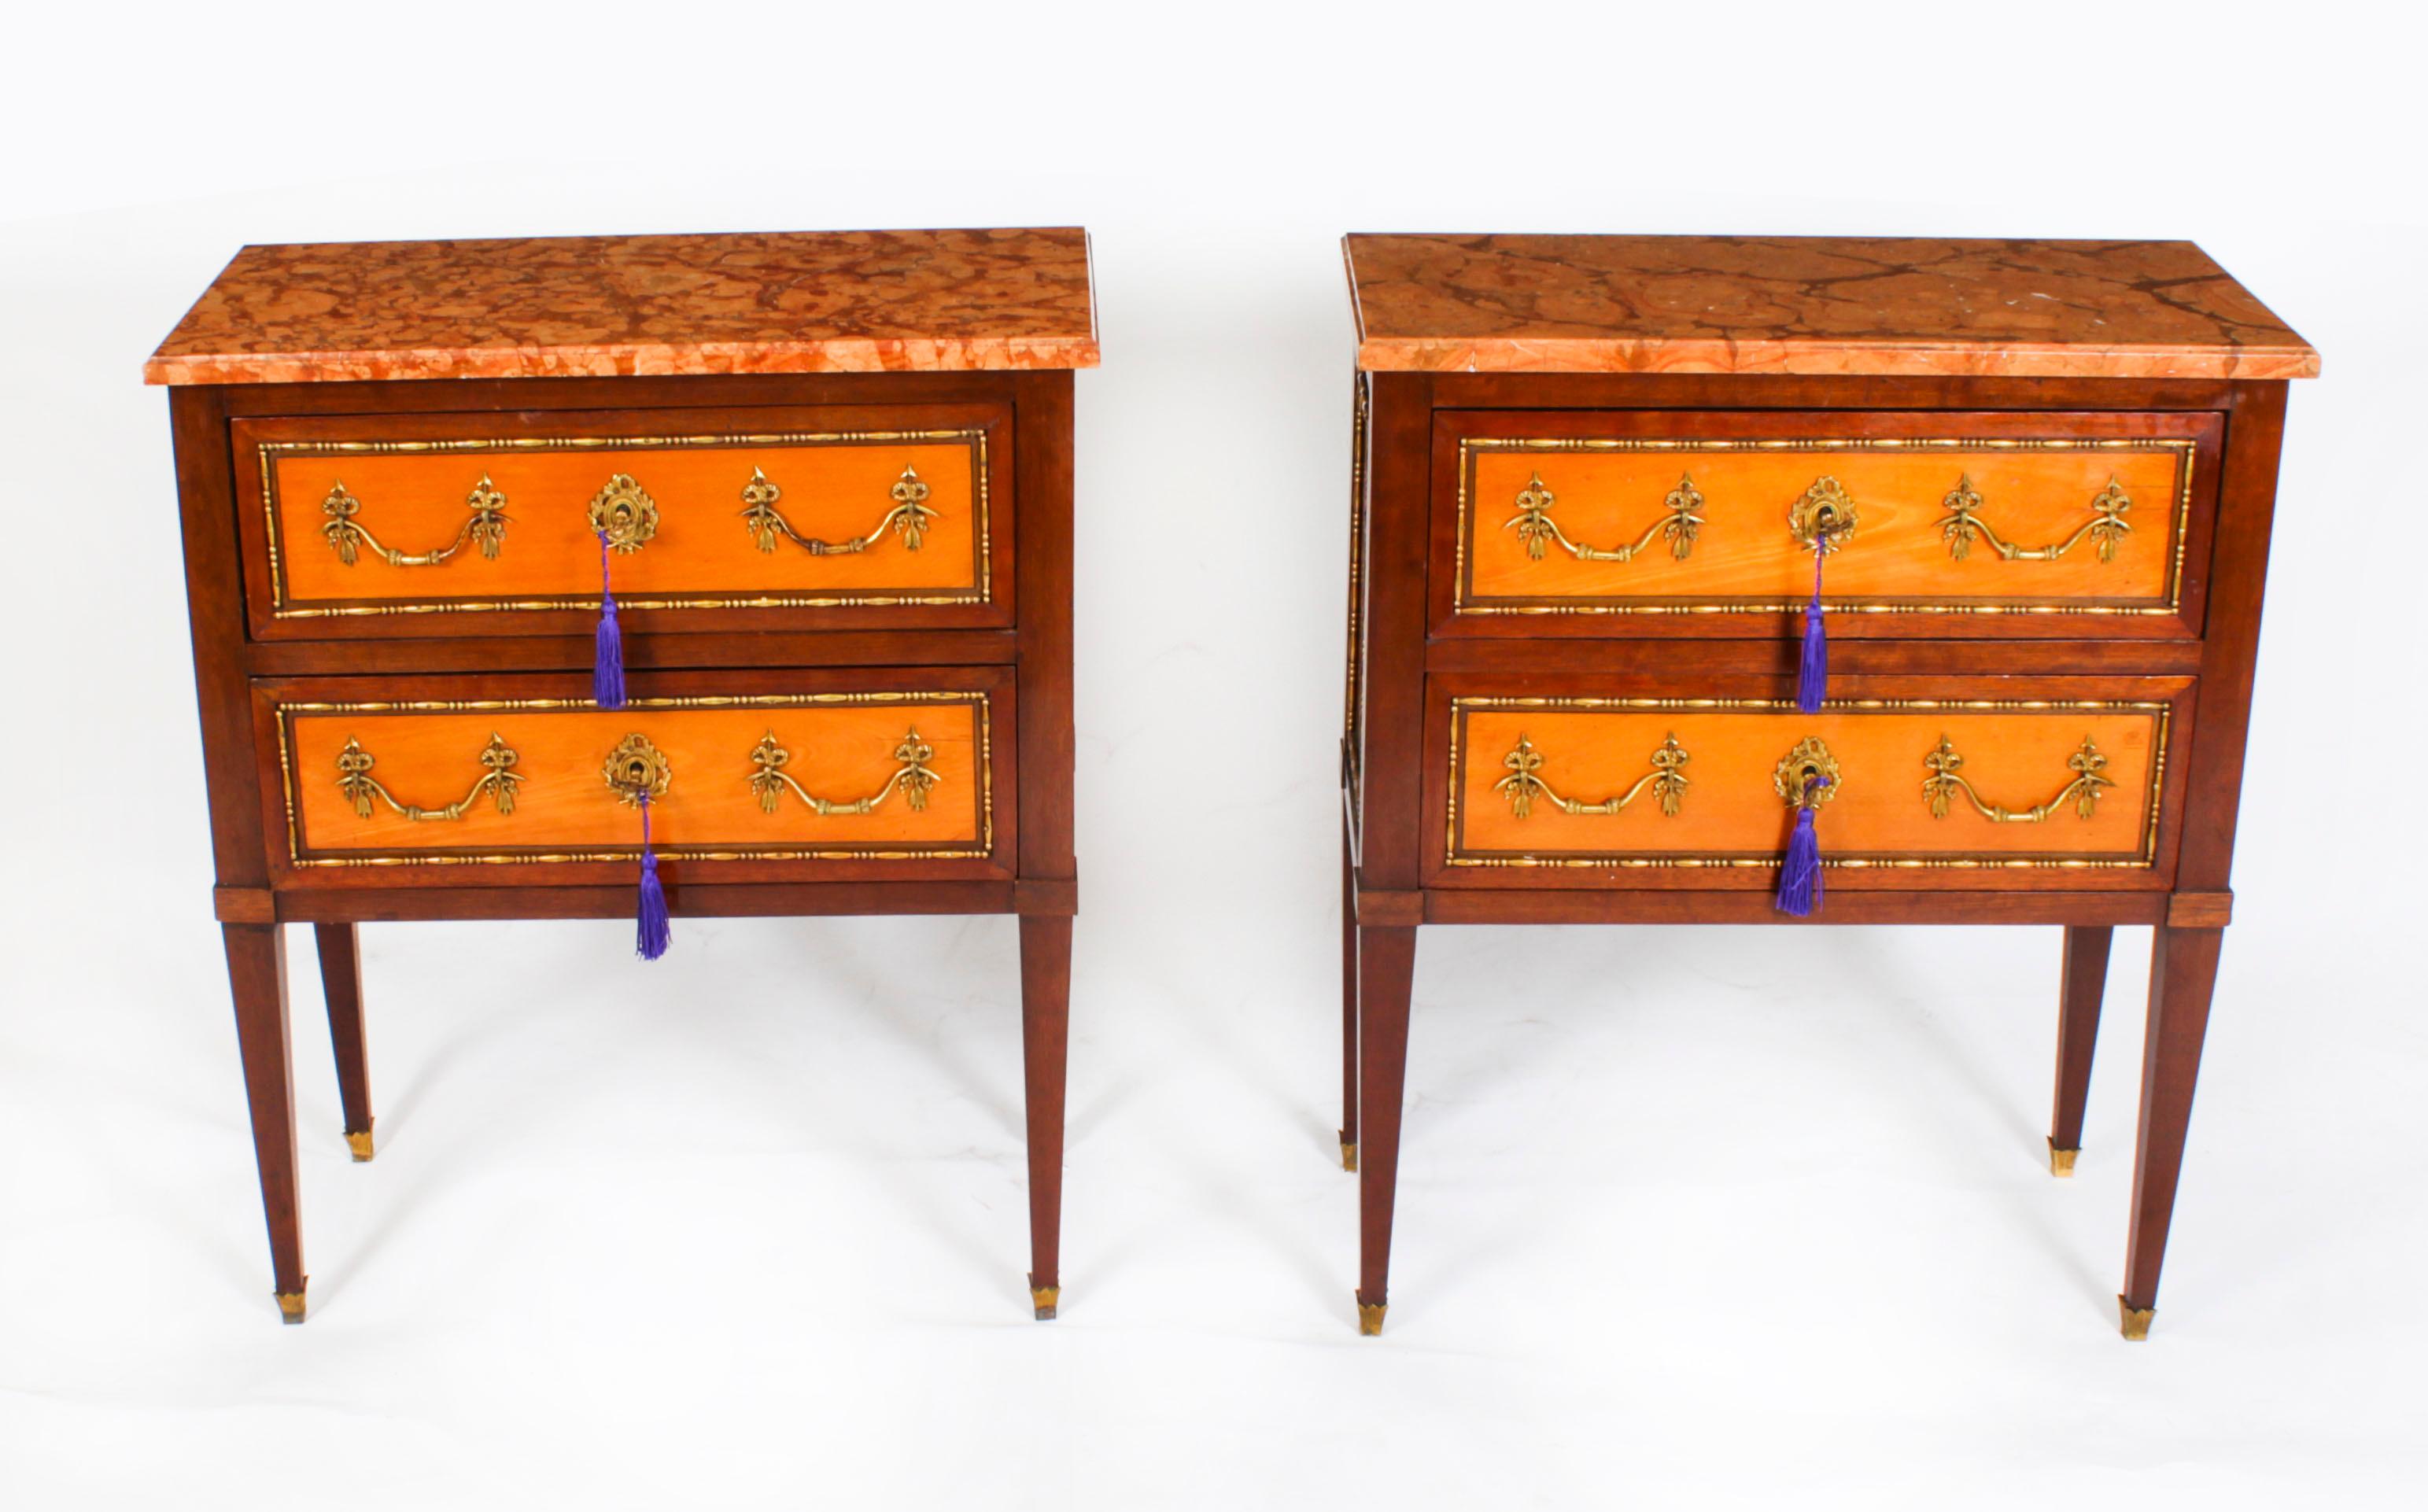 This is a gorgeous pair of antique Victorian marble topped satinwood and maple bedside commodes dating from the mid 19th century.
 
These two-drawer commodes are crafted from the most beautiful satinwood and maple and have solid oak lined drawers.